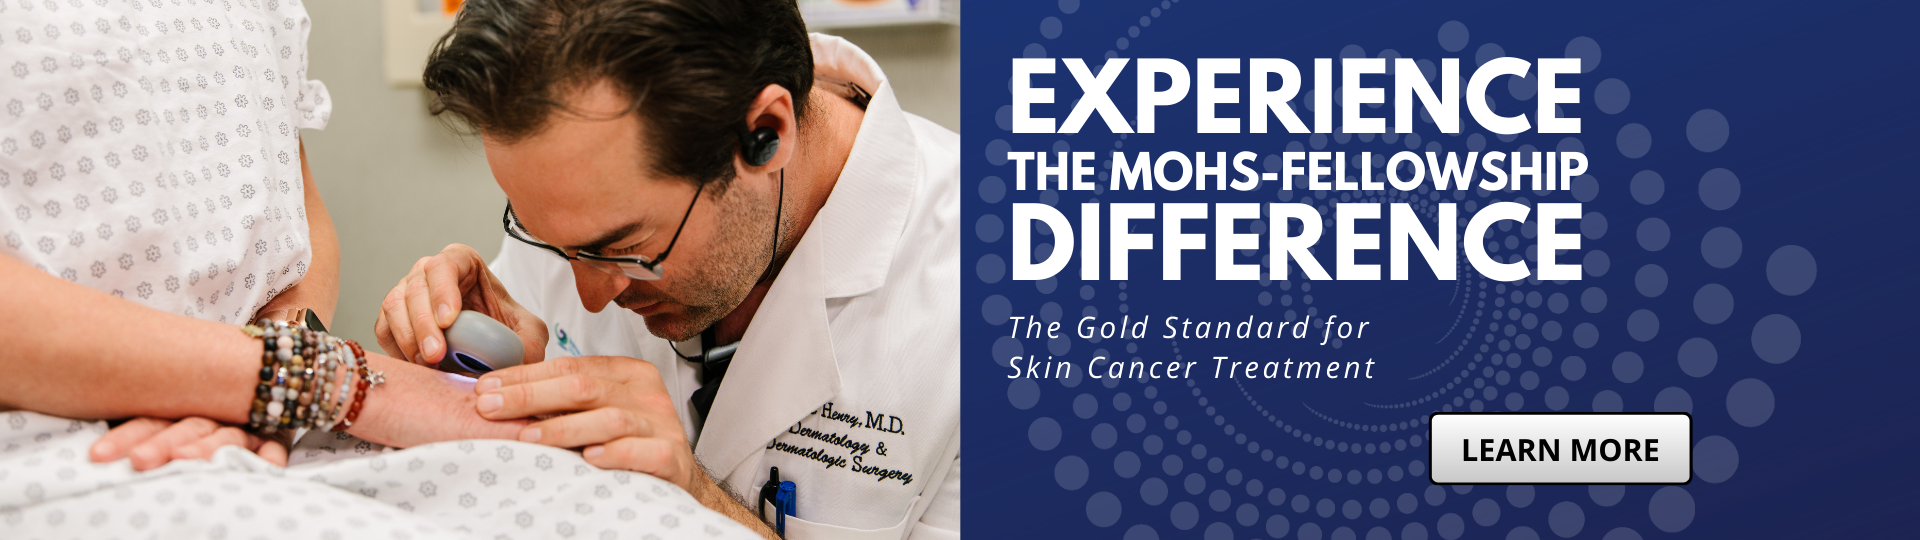 Mohs Fellowship Difference at Advanced Dermatology